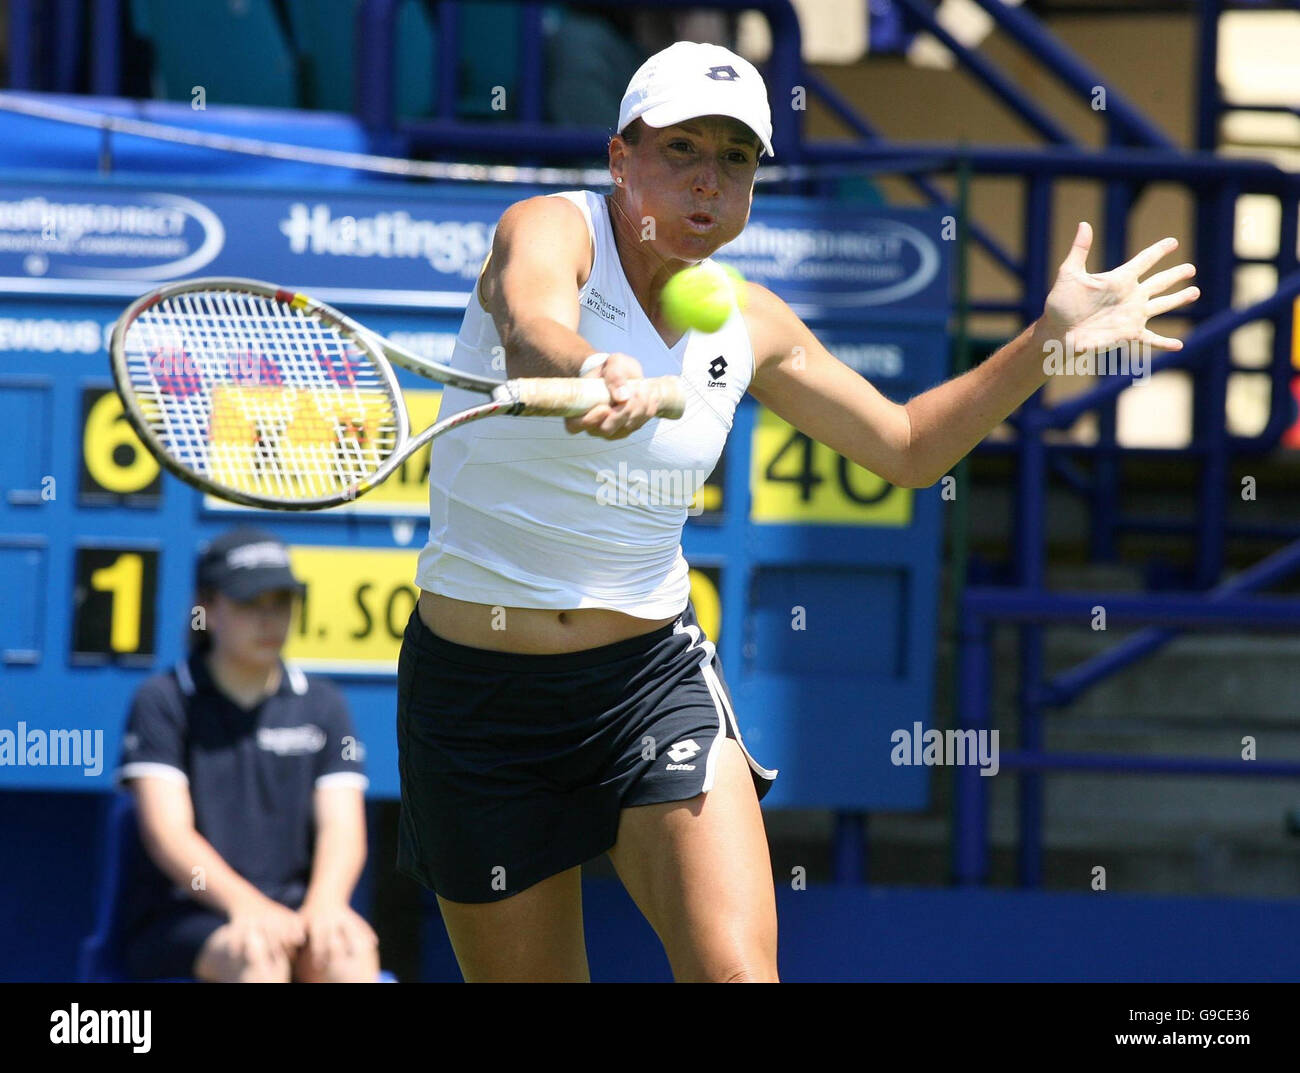 Tennis Eastbourne - Hasting's Direct International Stock Photo